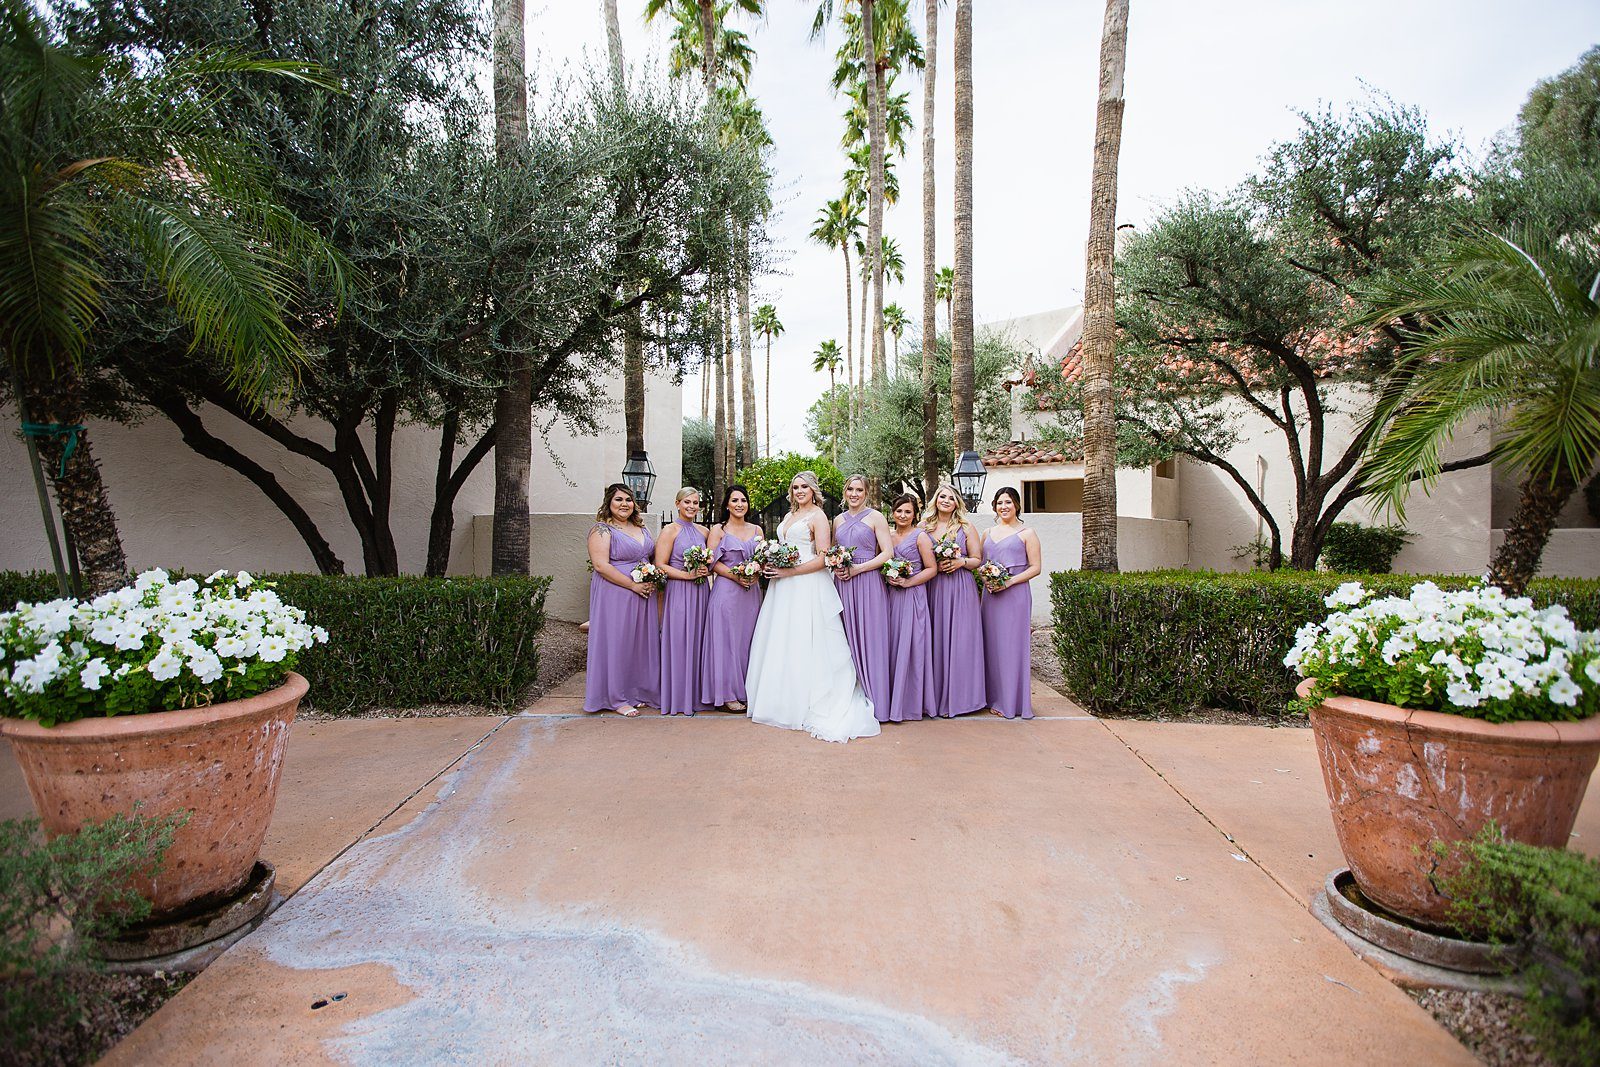 Bride and bridesmaids together at a The Scottsdale Resort at McCormick Ranch wedding by Arizona wedding photographer PMA Photography.